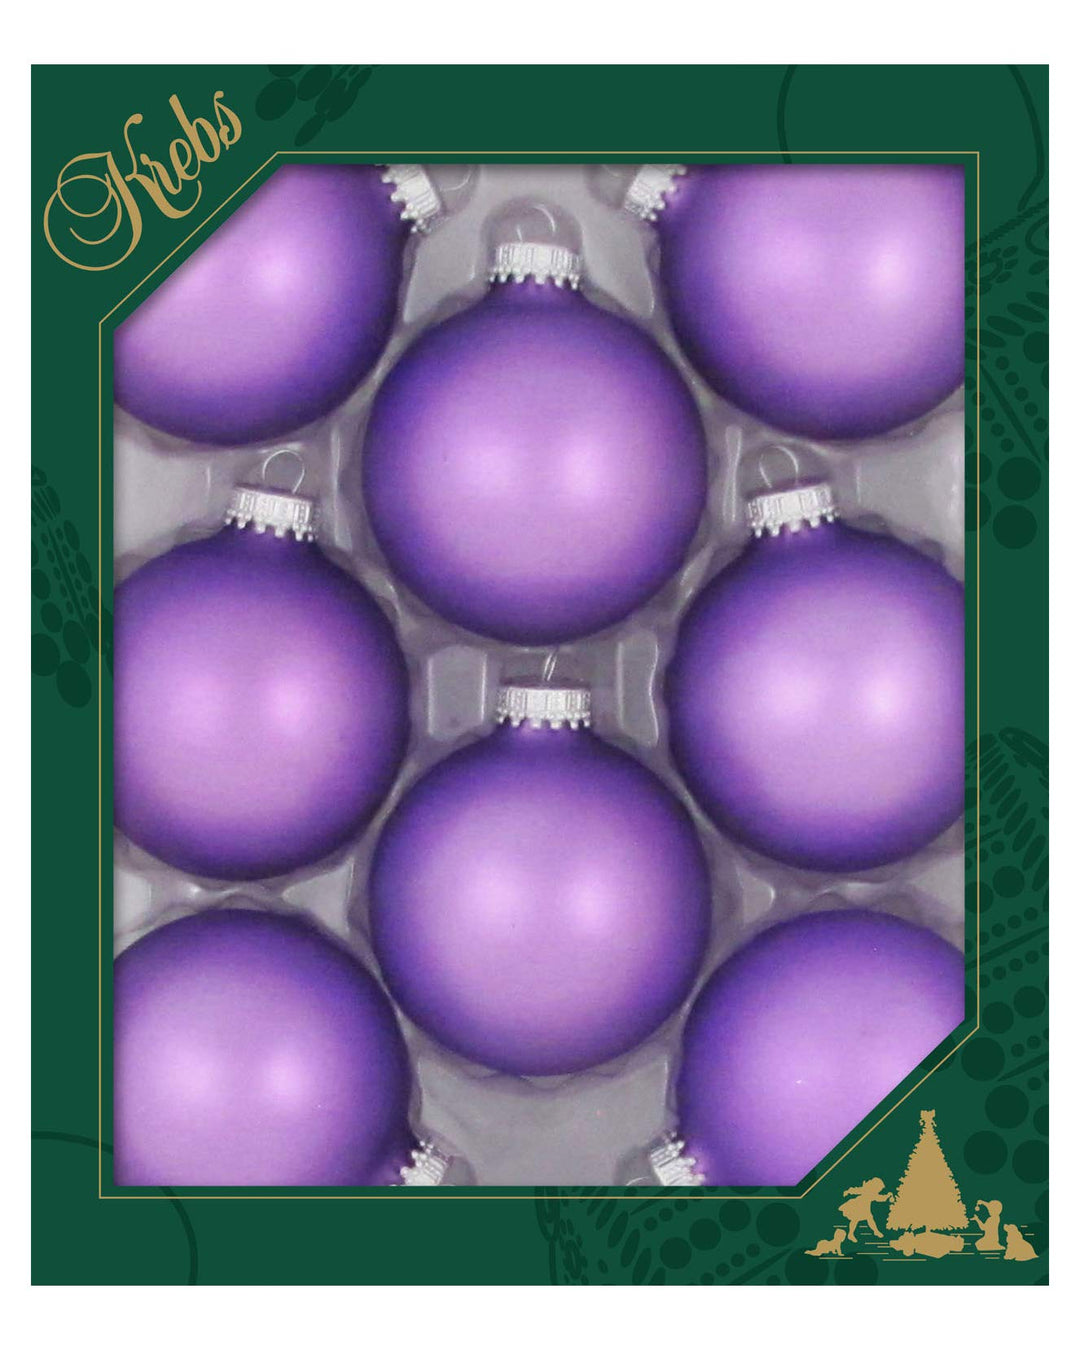 Christmas Tree Ornaments - 67mm / 2.625" [8 Pieces] Designer Glass Baubles from Christmas By Krebs - Handcrafted Seamless Hanging Holiday Decor for Trees (Velvet Amethyst Purple)